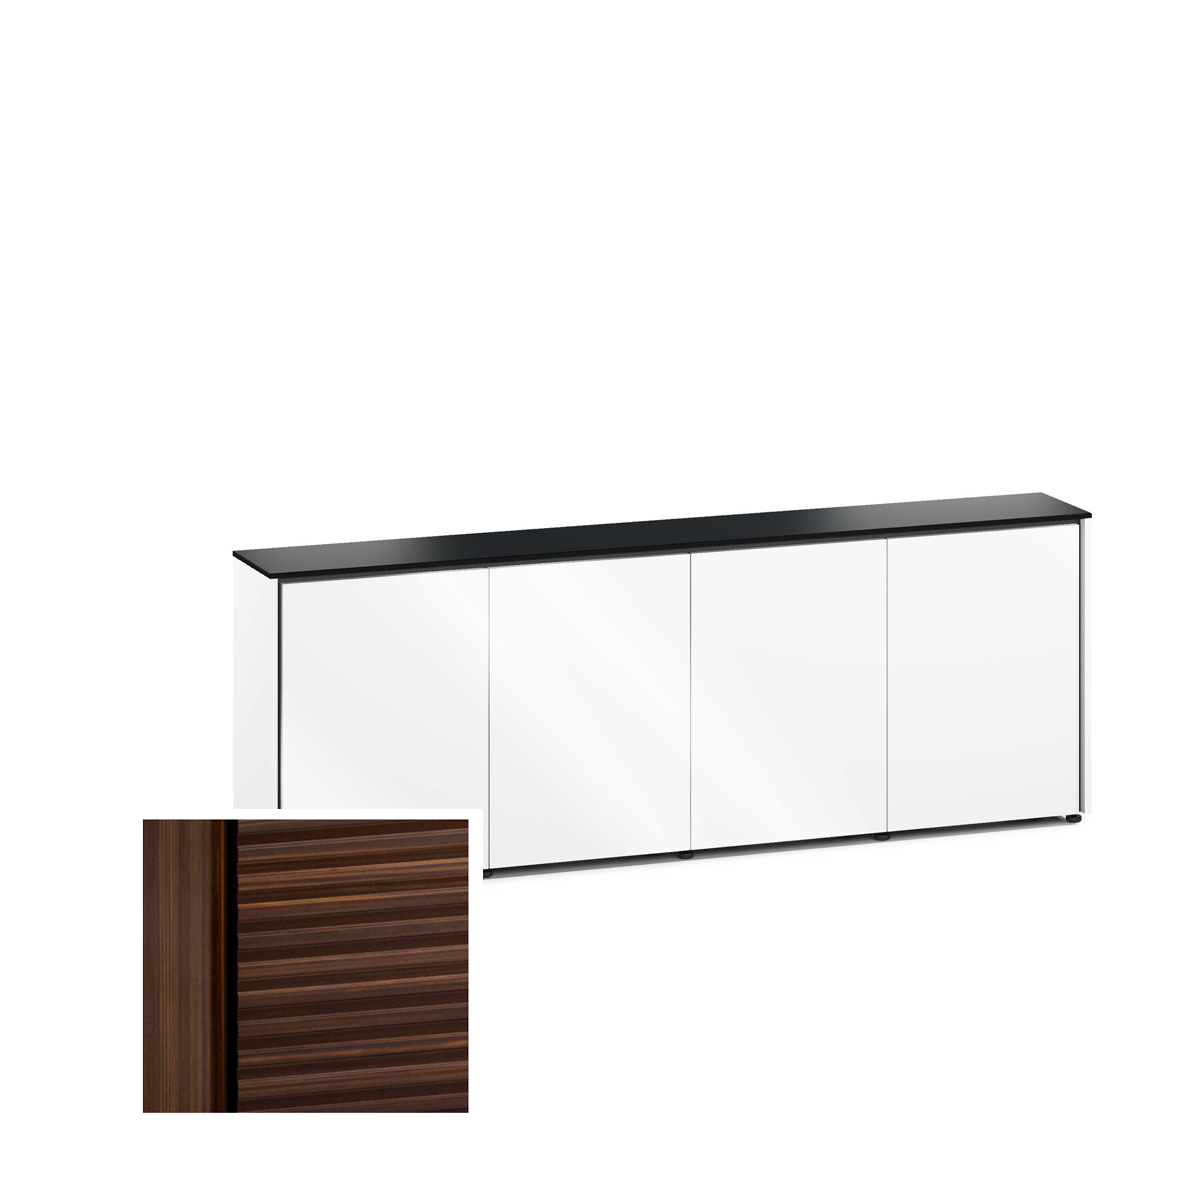 D1/347A/ZU/OB 4 Bay Low-Profile, Wall Cabinet, Zurich/Linear Texture- Opium Brown